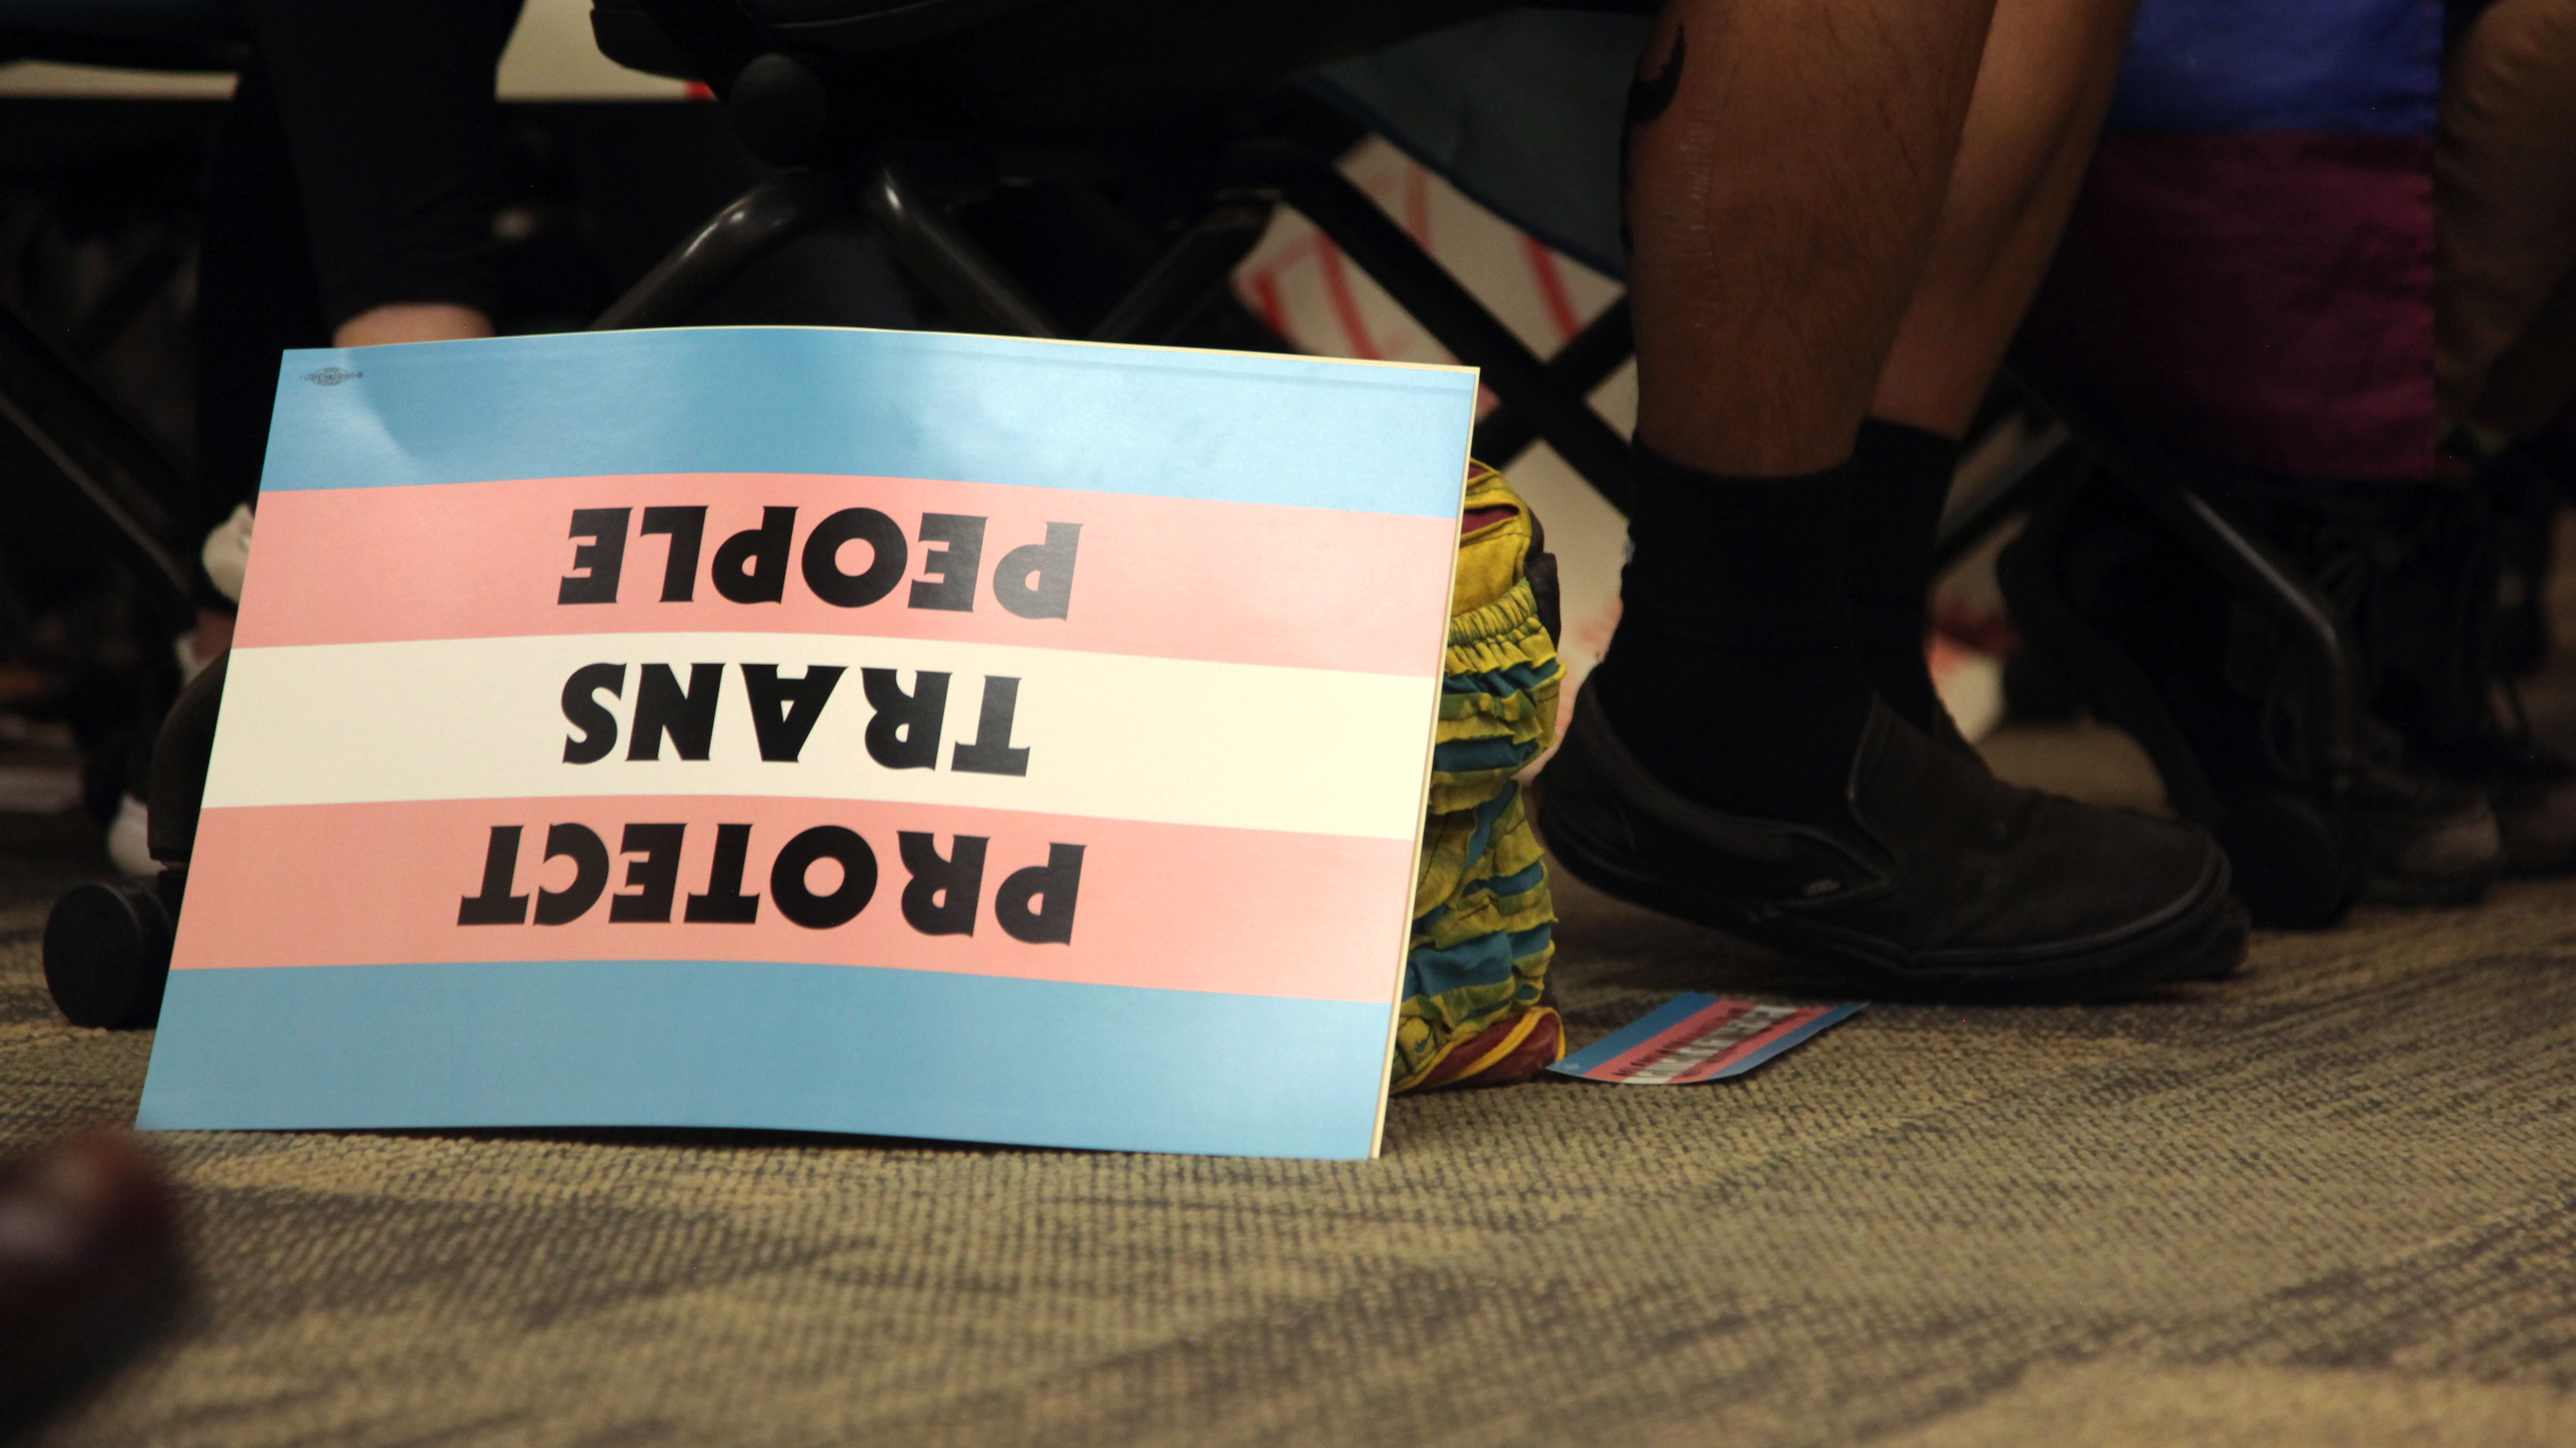 Protect Trans People Sign